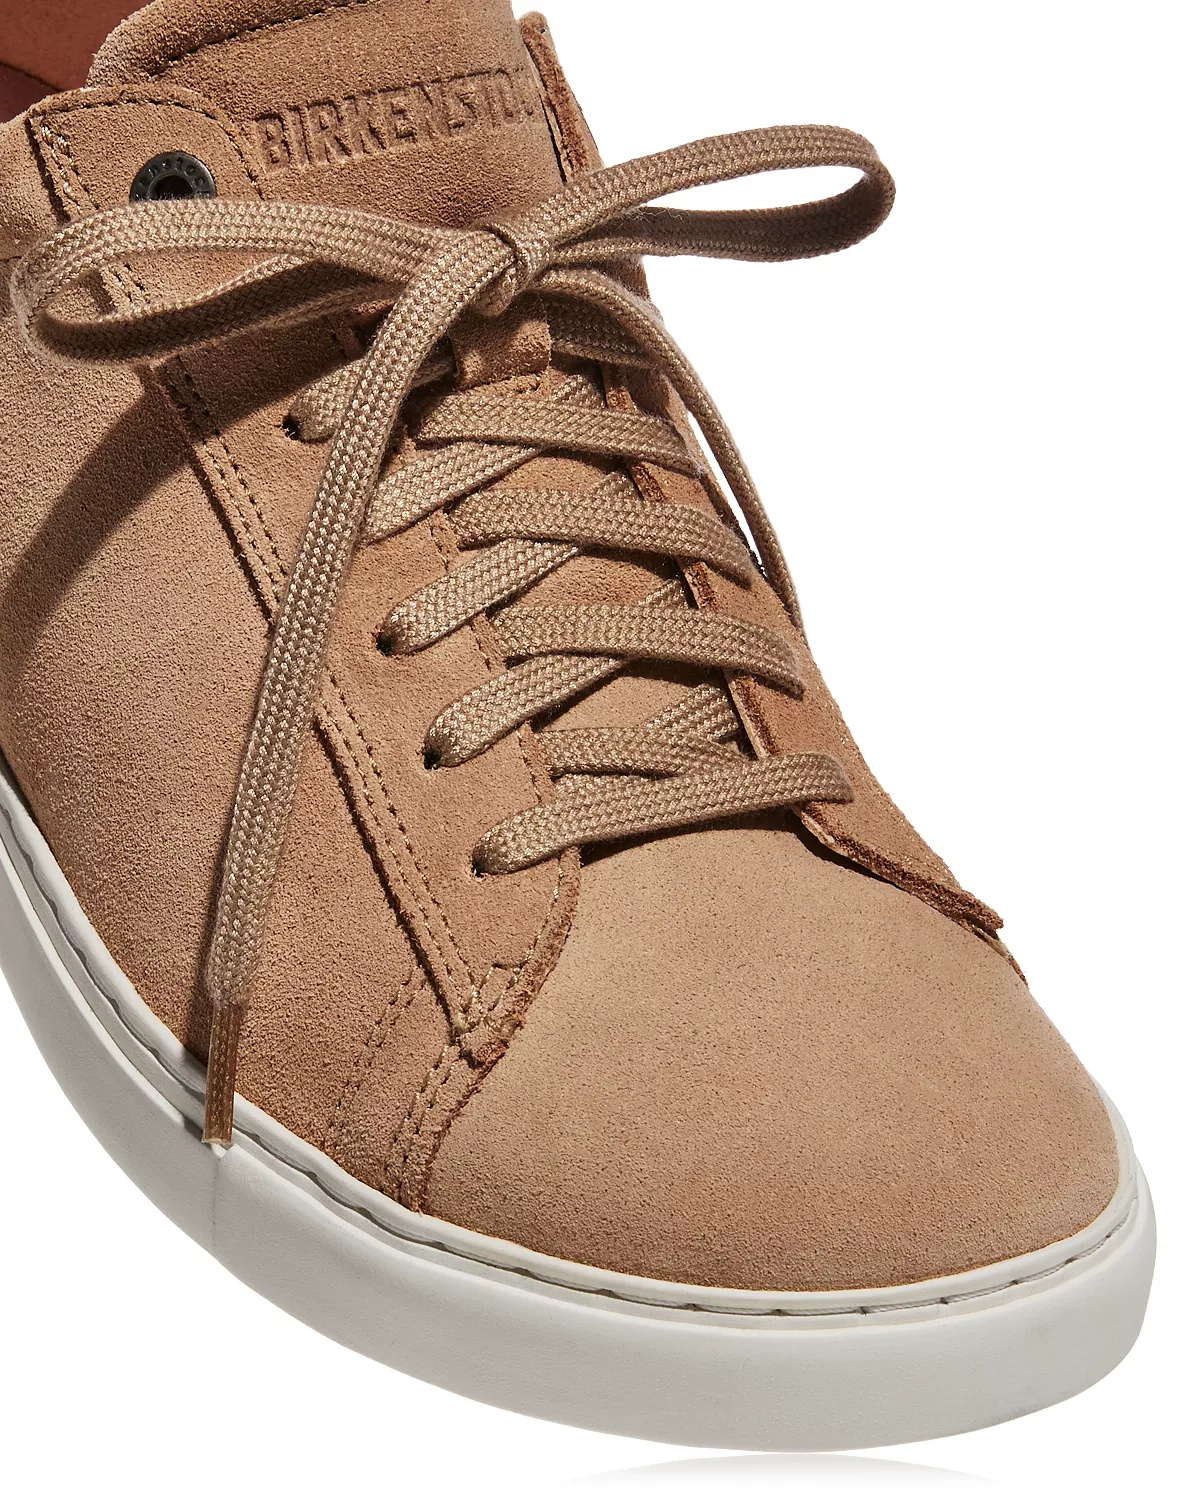 Women's Bend Lace Up Sneakers - 5